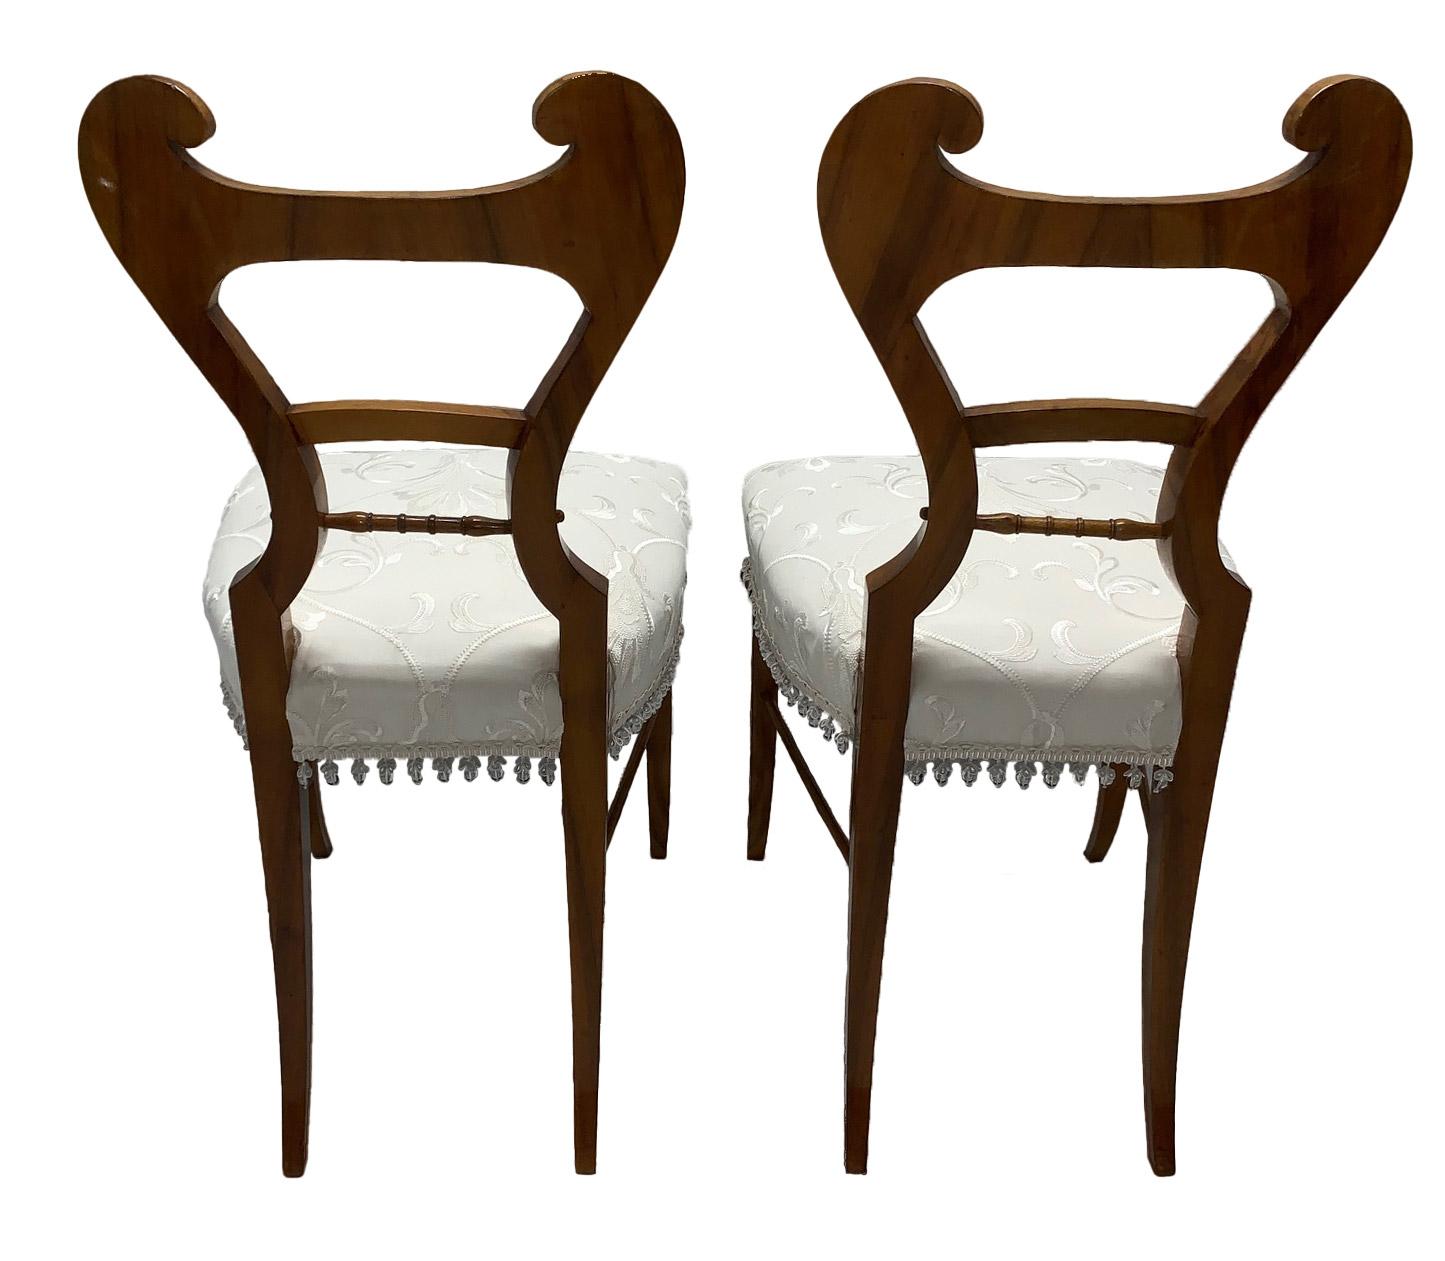 Austrian Early 19th Century Neoclassical Biedermeier Side Chairs with Walnut Inlay, Pair For Sale